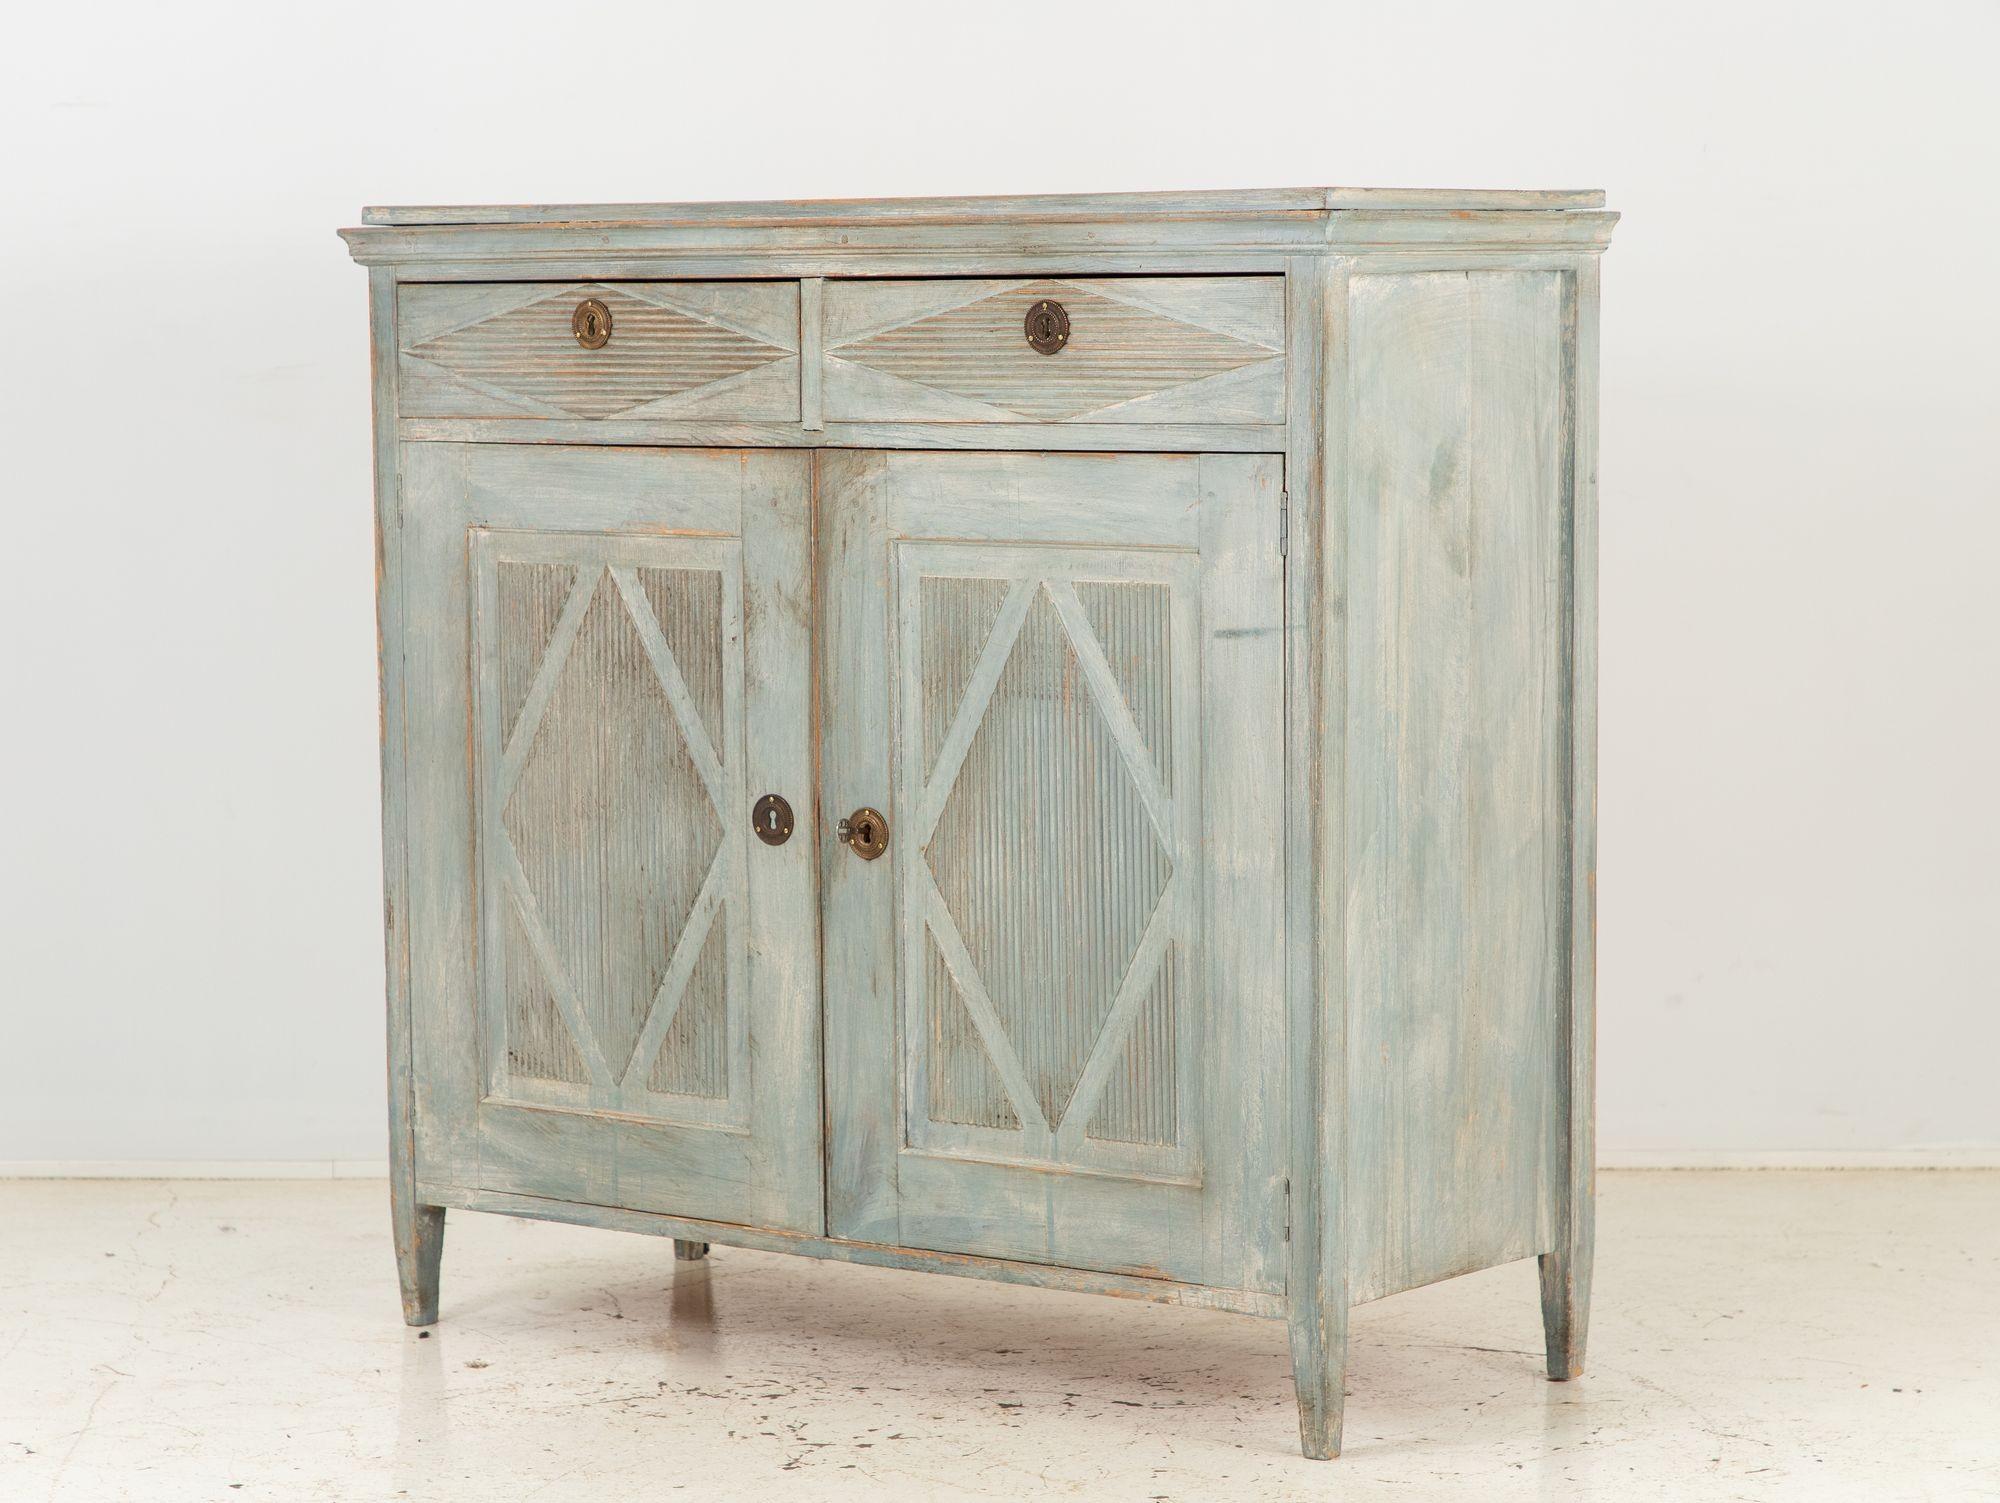 Emanating the grace of late 19th-century Gustavian style, this captivating blue-painted buffet evokes a sense of timeless sophistication. The buffet's two doors over a two-door cabinet configuration offers a harmonious balance of form and function.